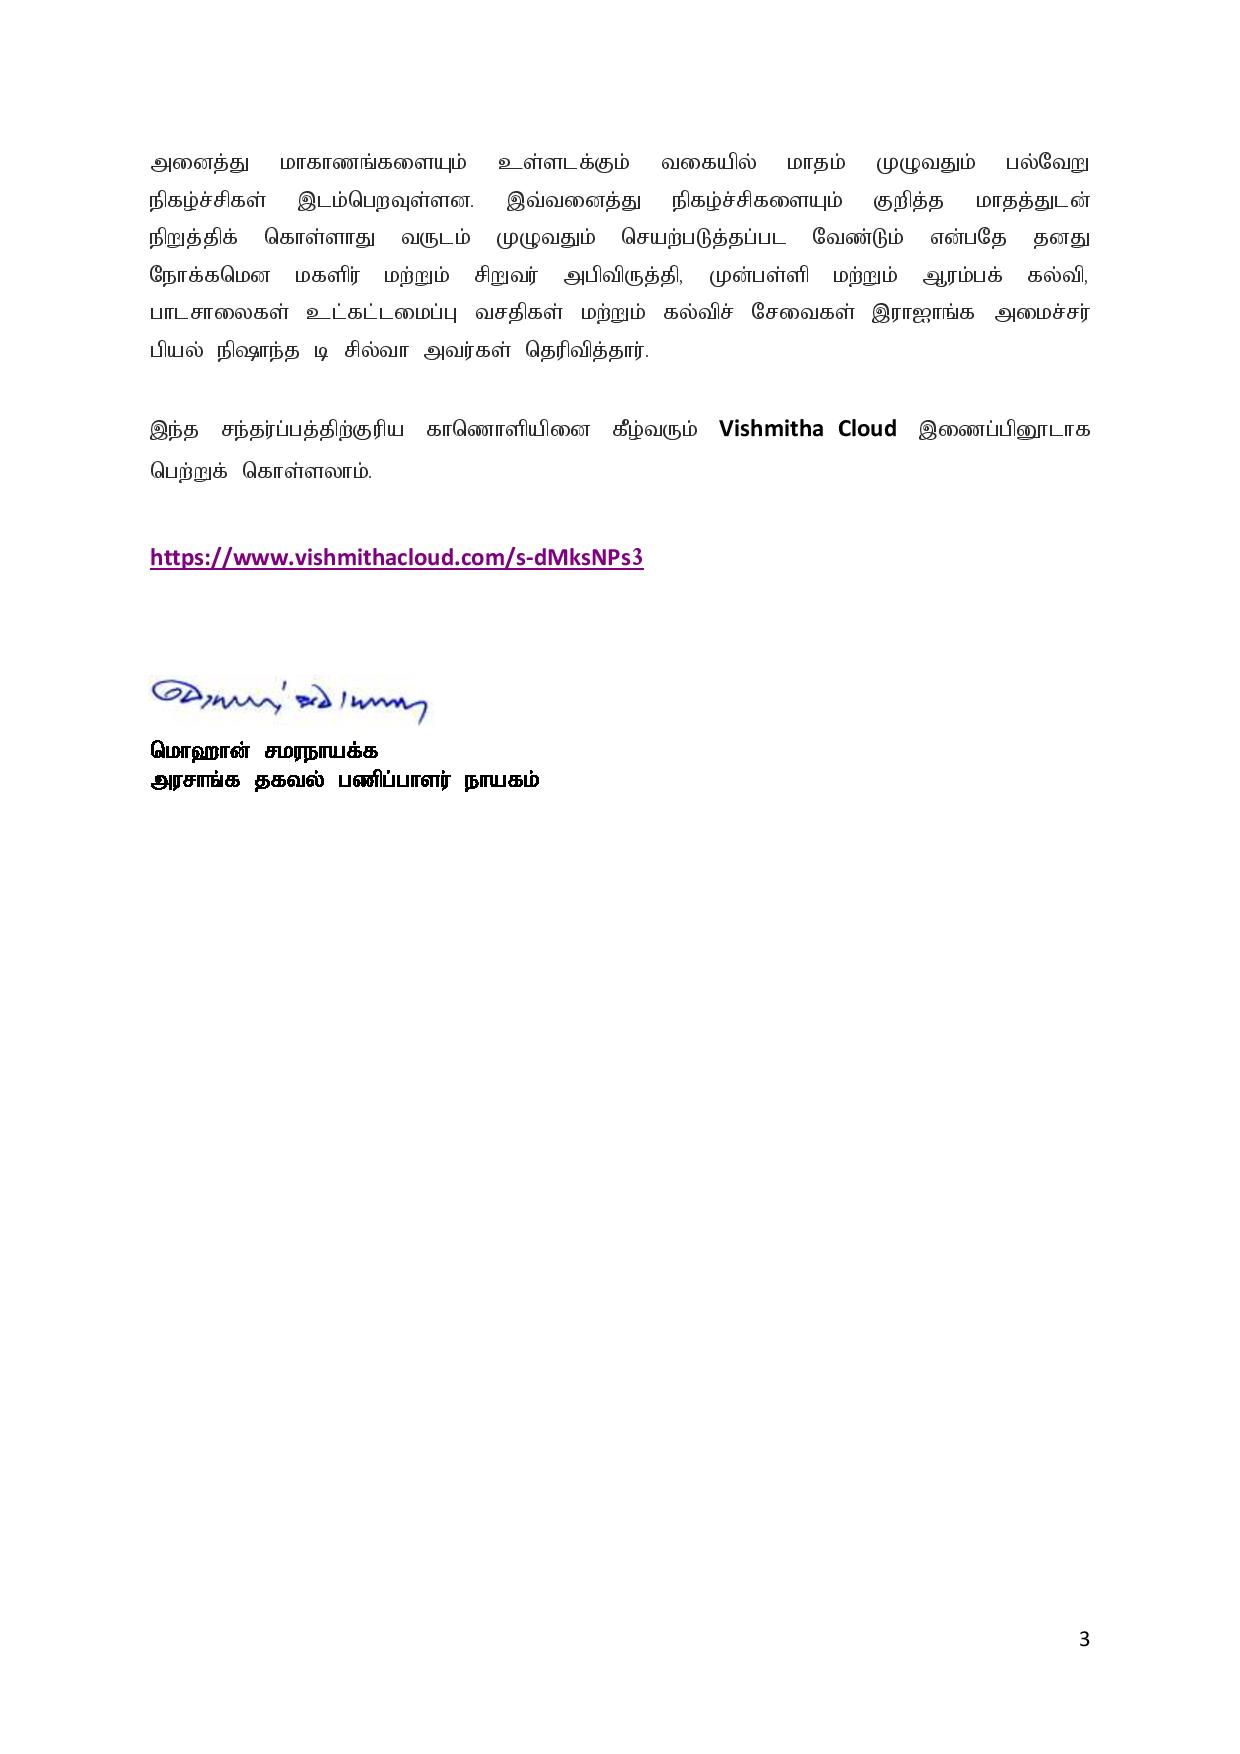 Press Release 1002 Tamil page 003